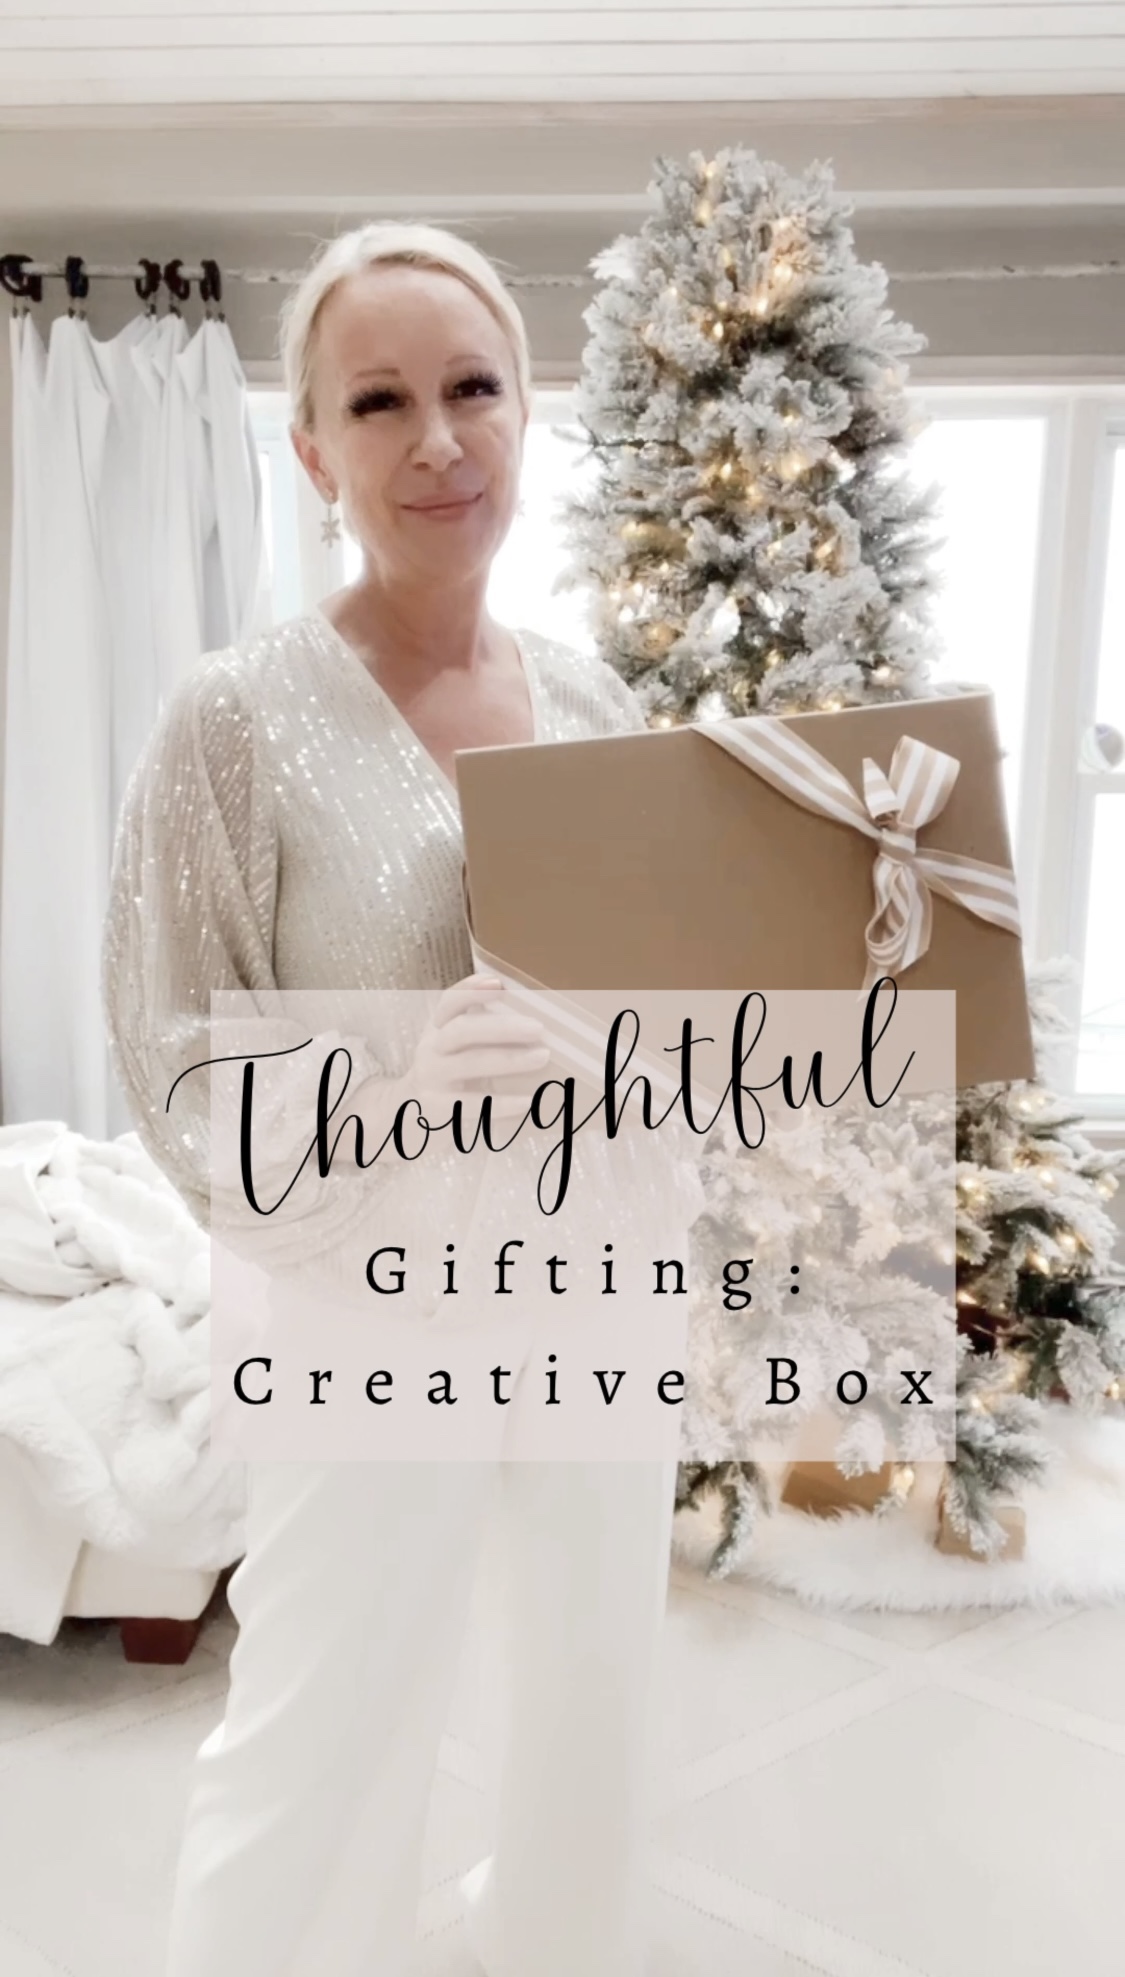 Thoughtful Gift Boxes: “Creative Box” for Children